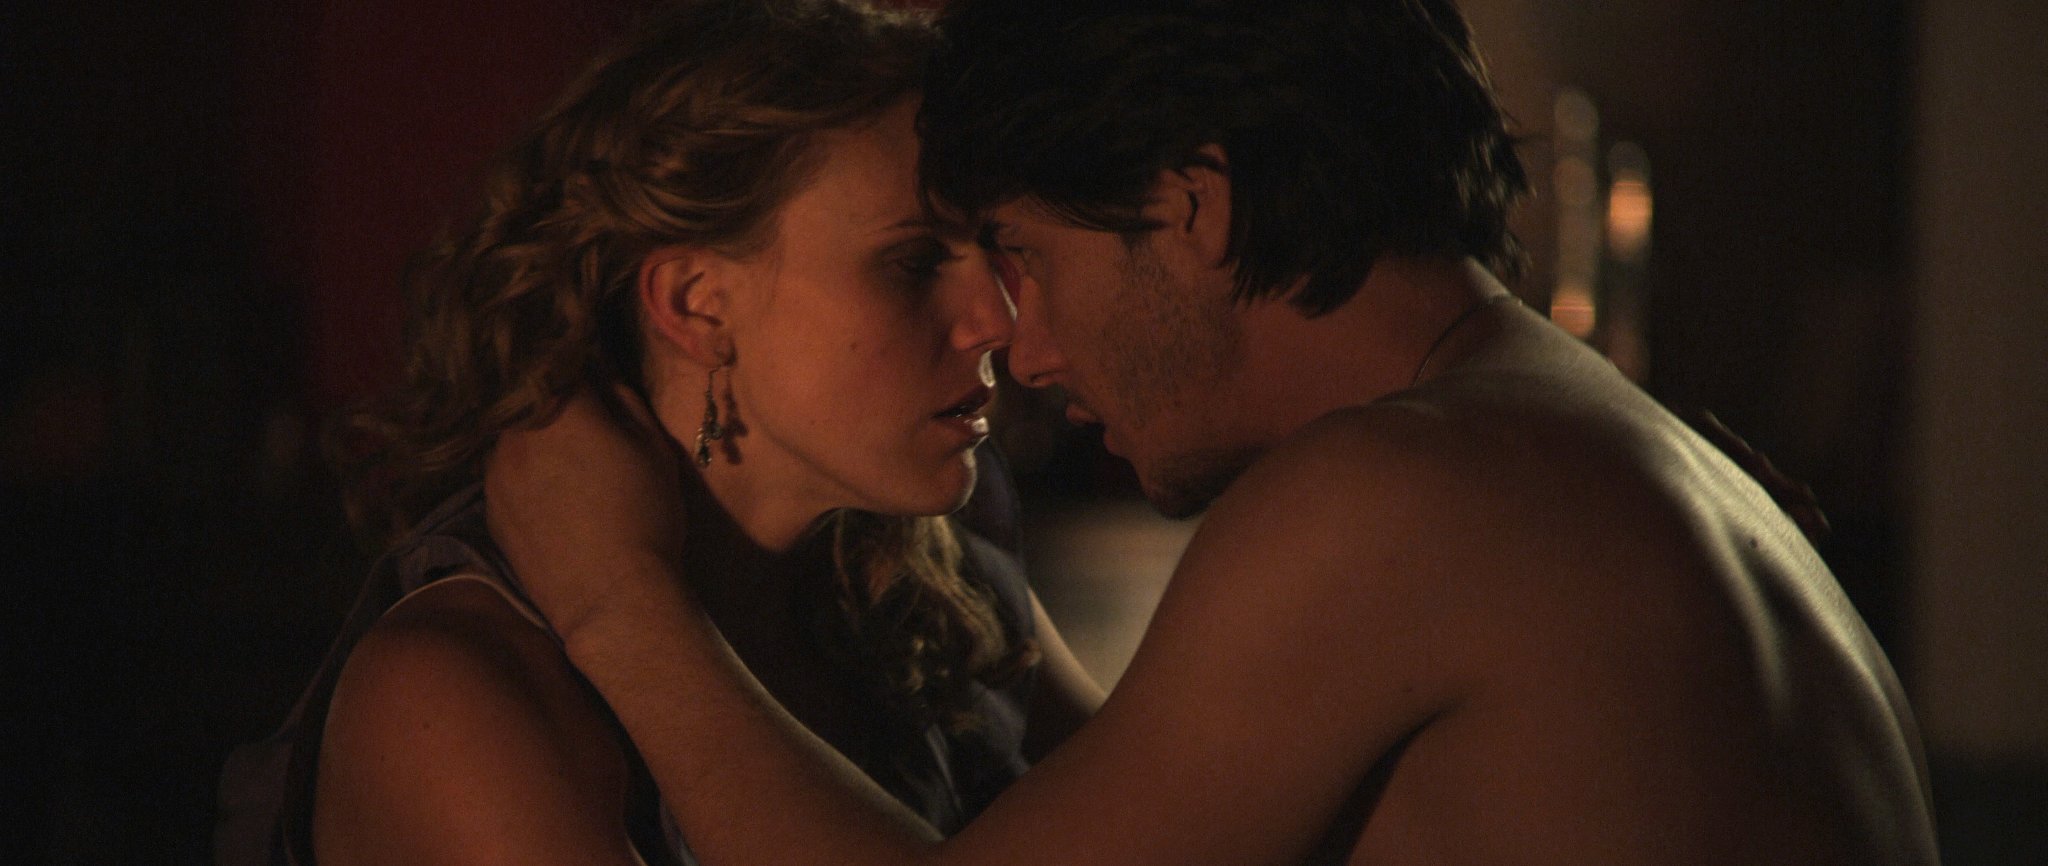 James Duval and Jill Hoiles in Look at Me (2012)